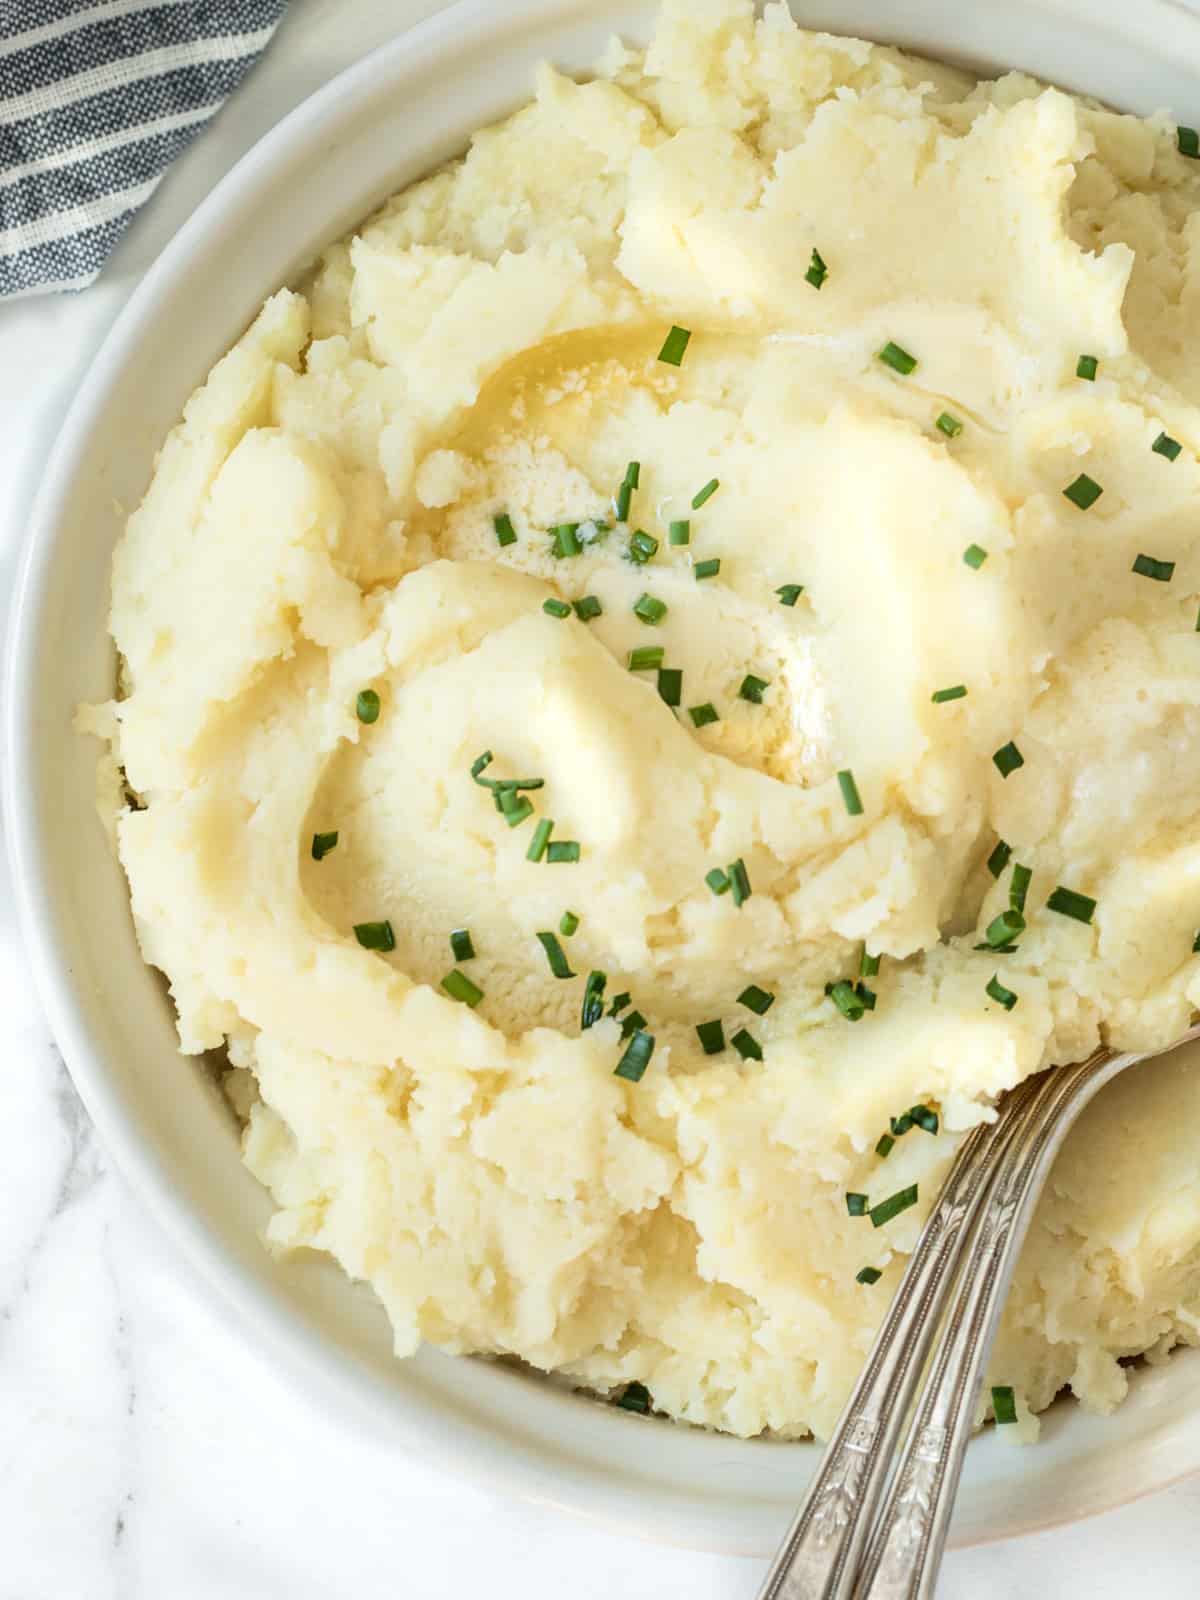 Bowlful of mashed potatoes with butter and chives.